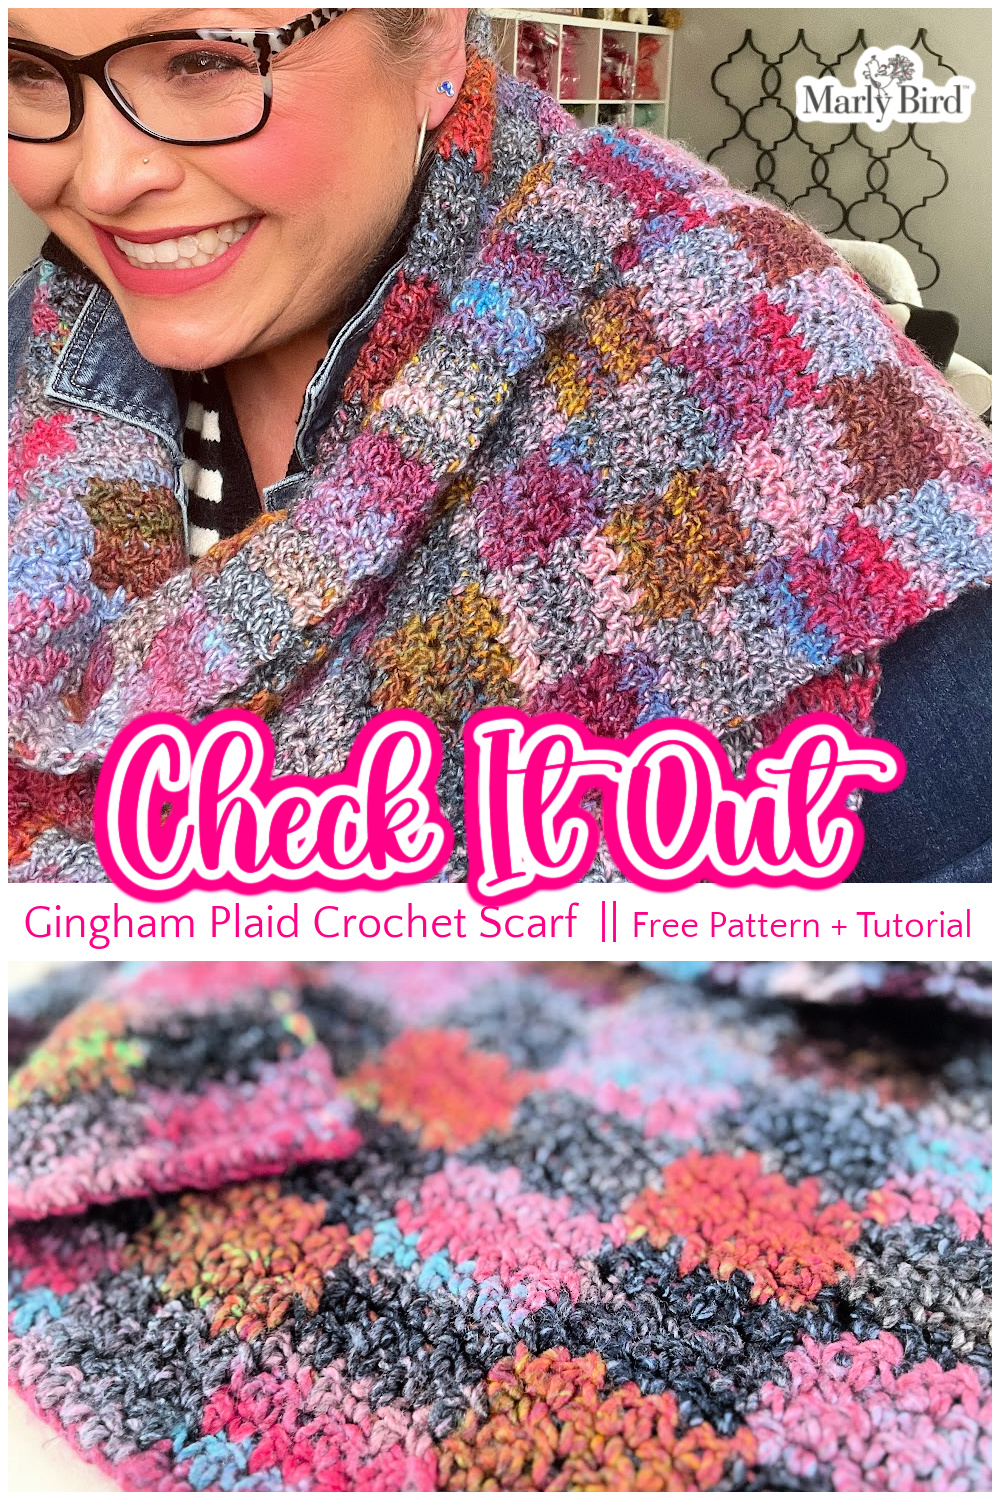 A person smiling while wearing a colorful gingham plaid crochet scarf. Below them, there's a close-up view of the scarf's intricate pattern. The text on the image reads, "Check It Out: DIY Plaid Crochet Scarf || Free Pattern + Video Tutorial." A "Marly Bird" logo is visible. -Marly Bird